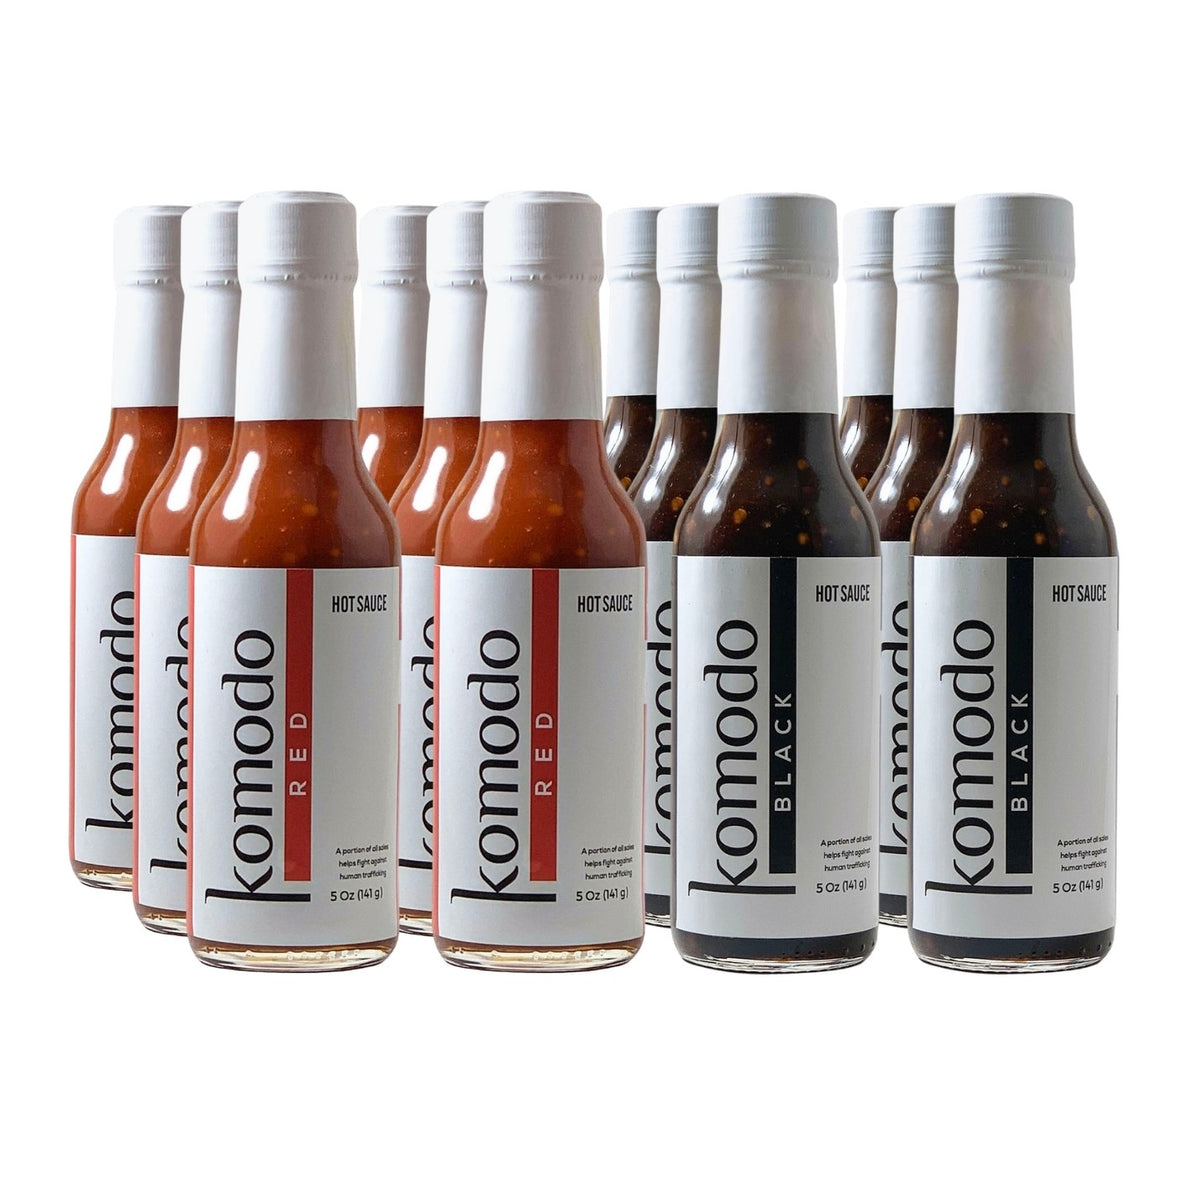 Save money and experience the best of both worlds with our Red & Black Mix. This is our most popular option because you get both Komodo Sauces ﻿and﻿ you get them at a discount - it's really a no-brainer!